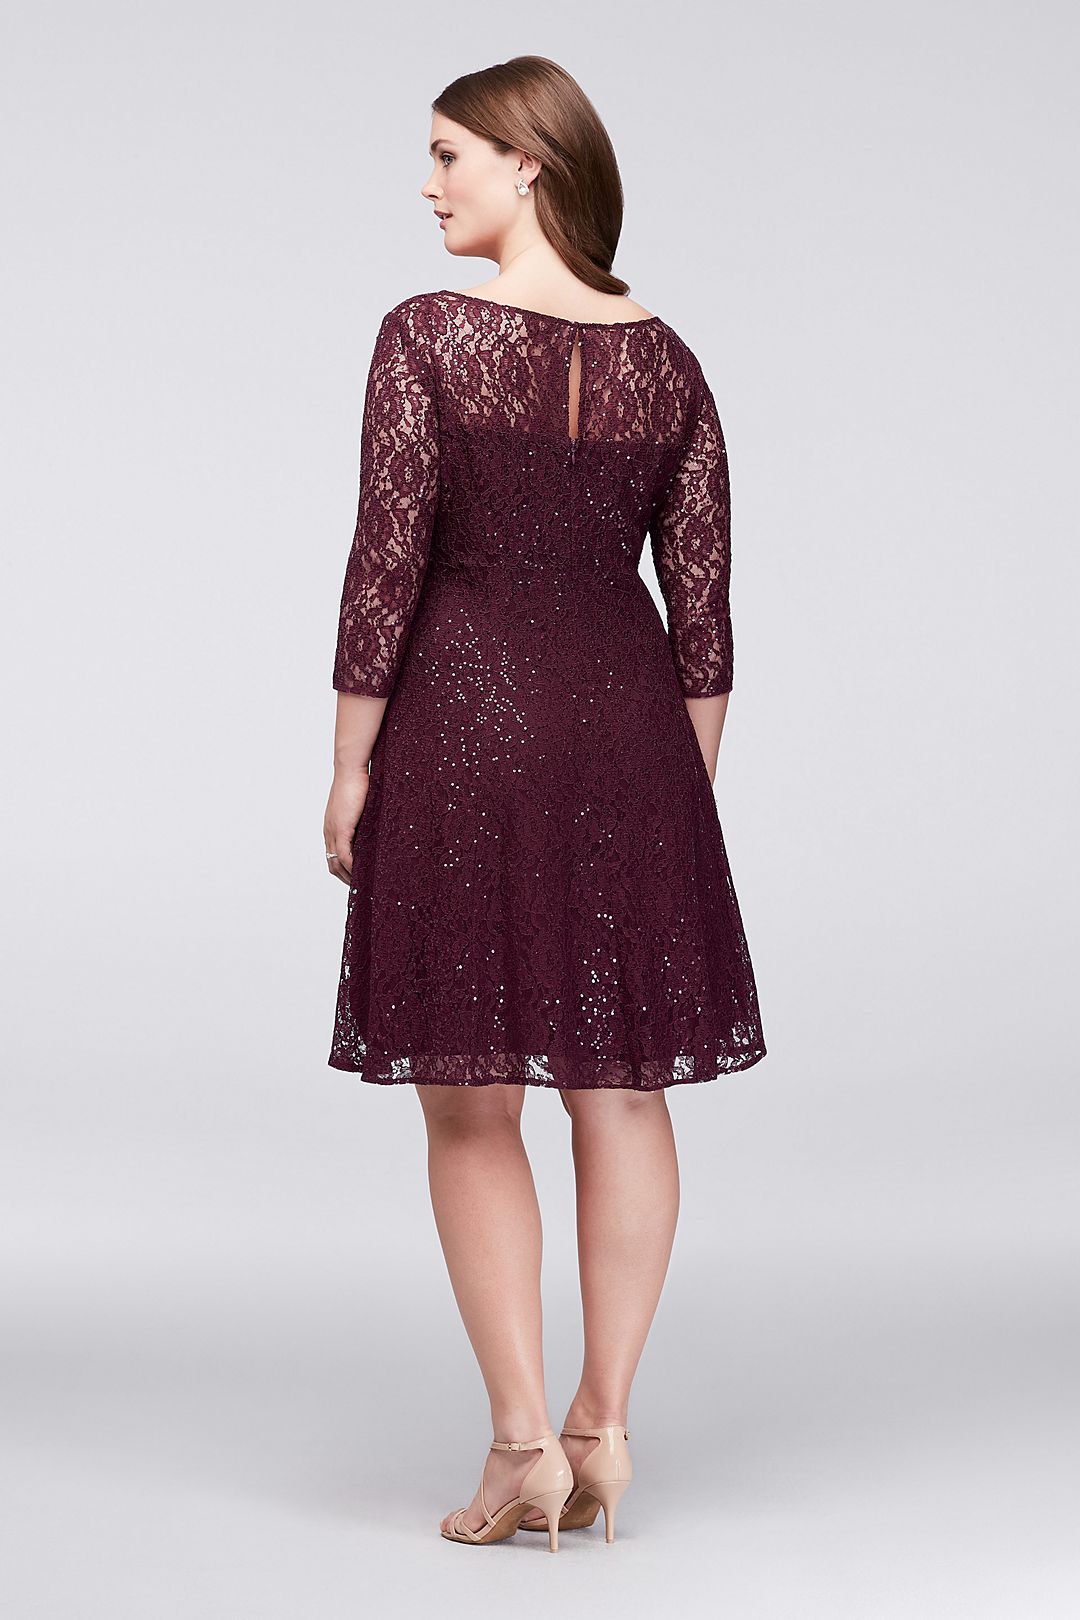 Sequined Lace Fit-and-Flare Dress Image 2